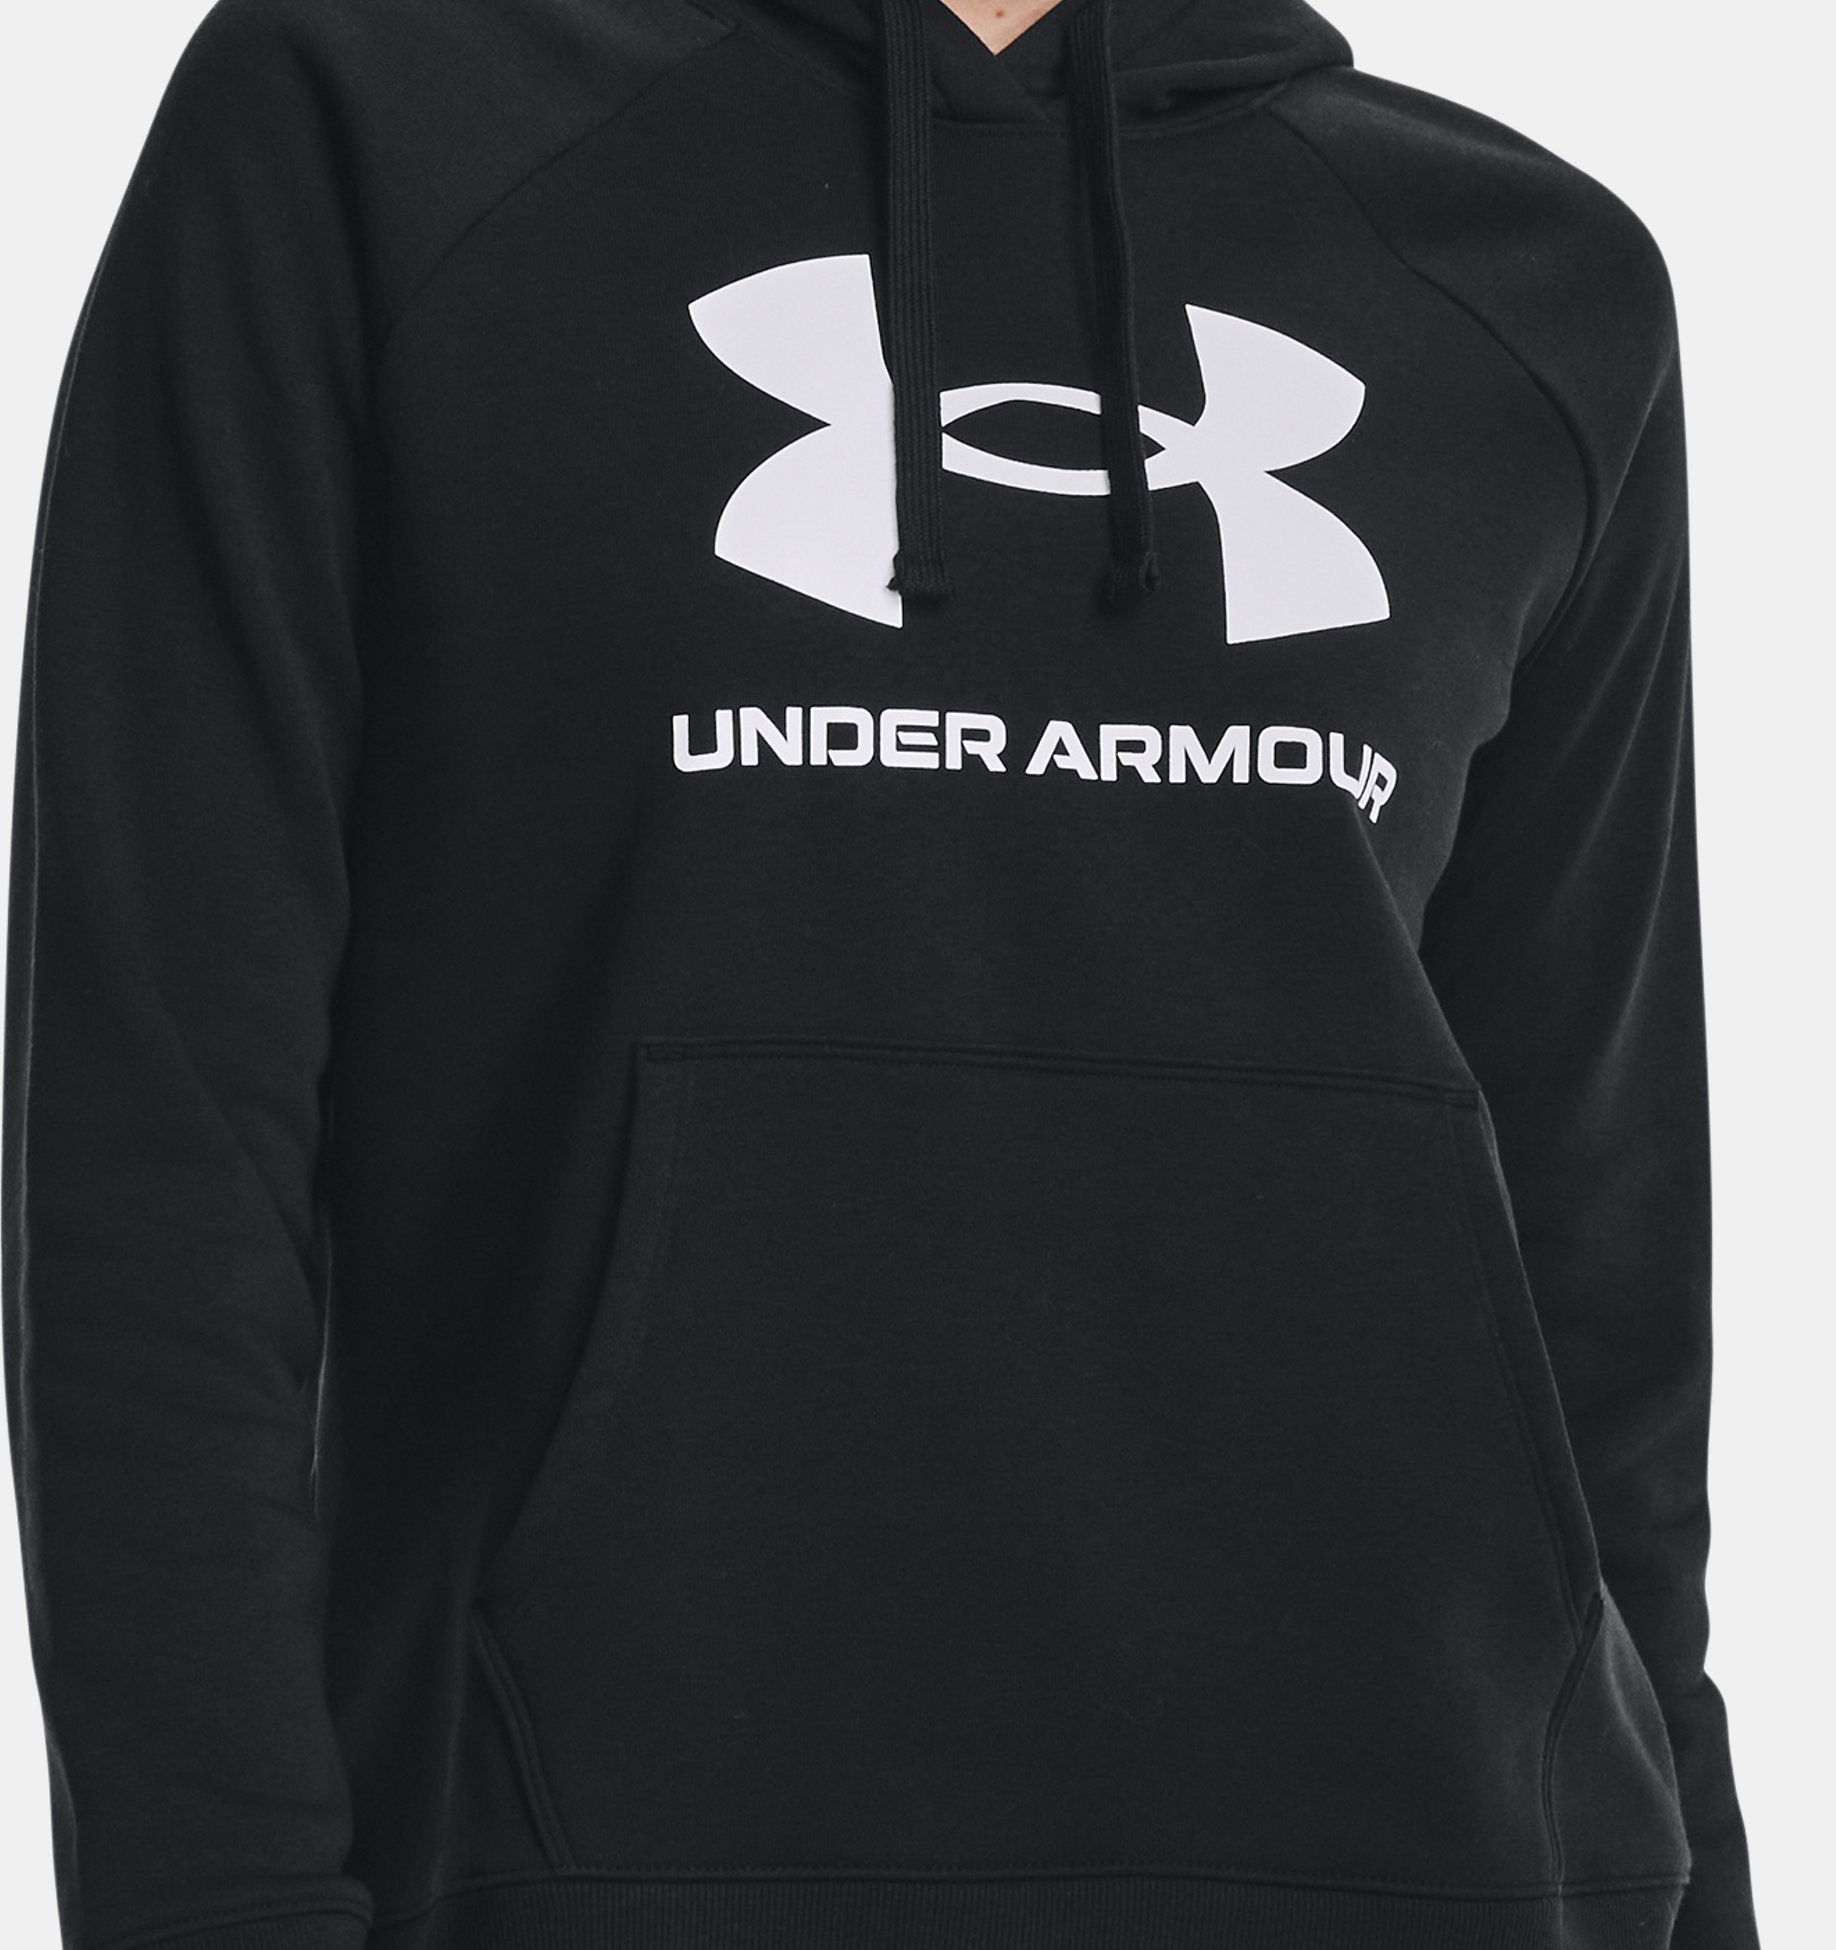 Extra 30% off of already reduced Under Armour Apparel